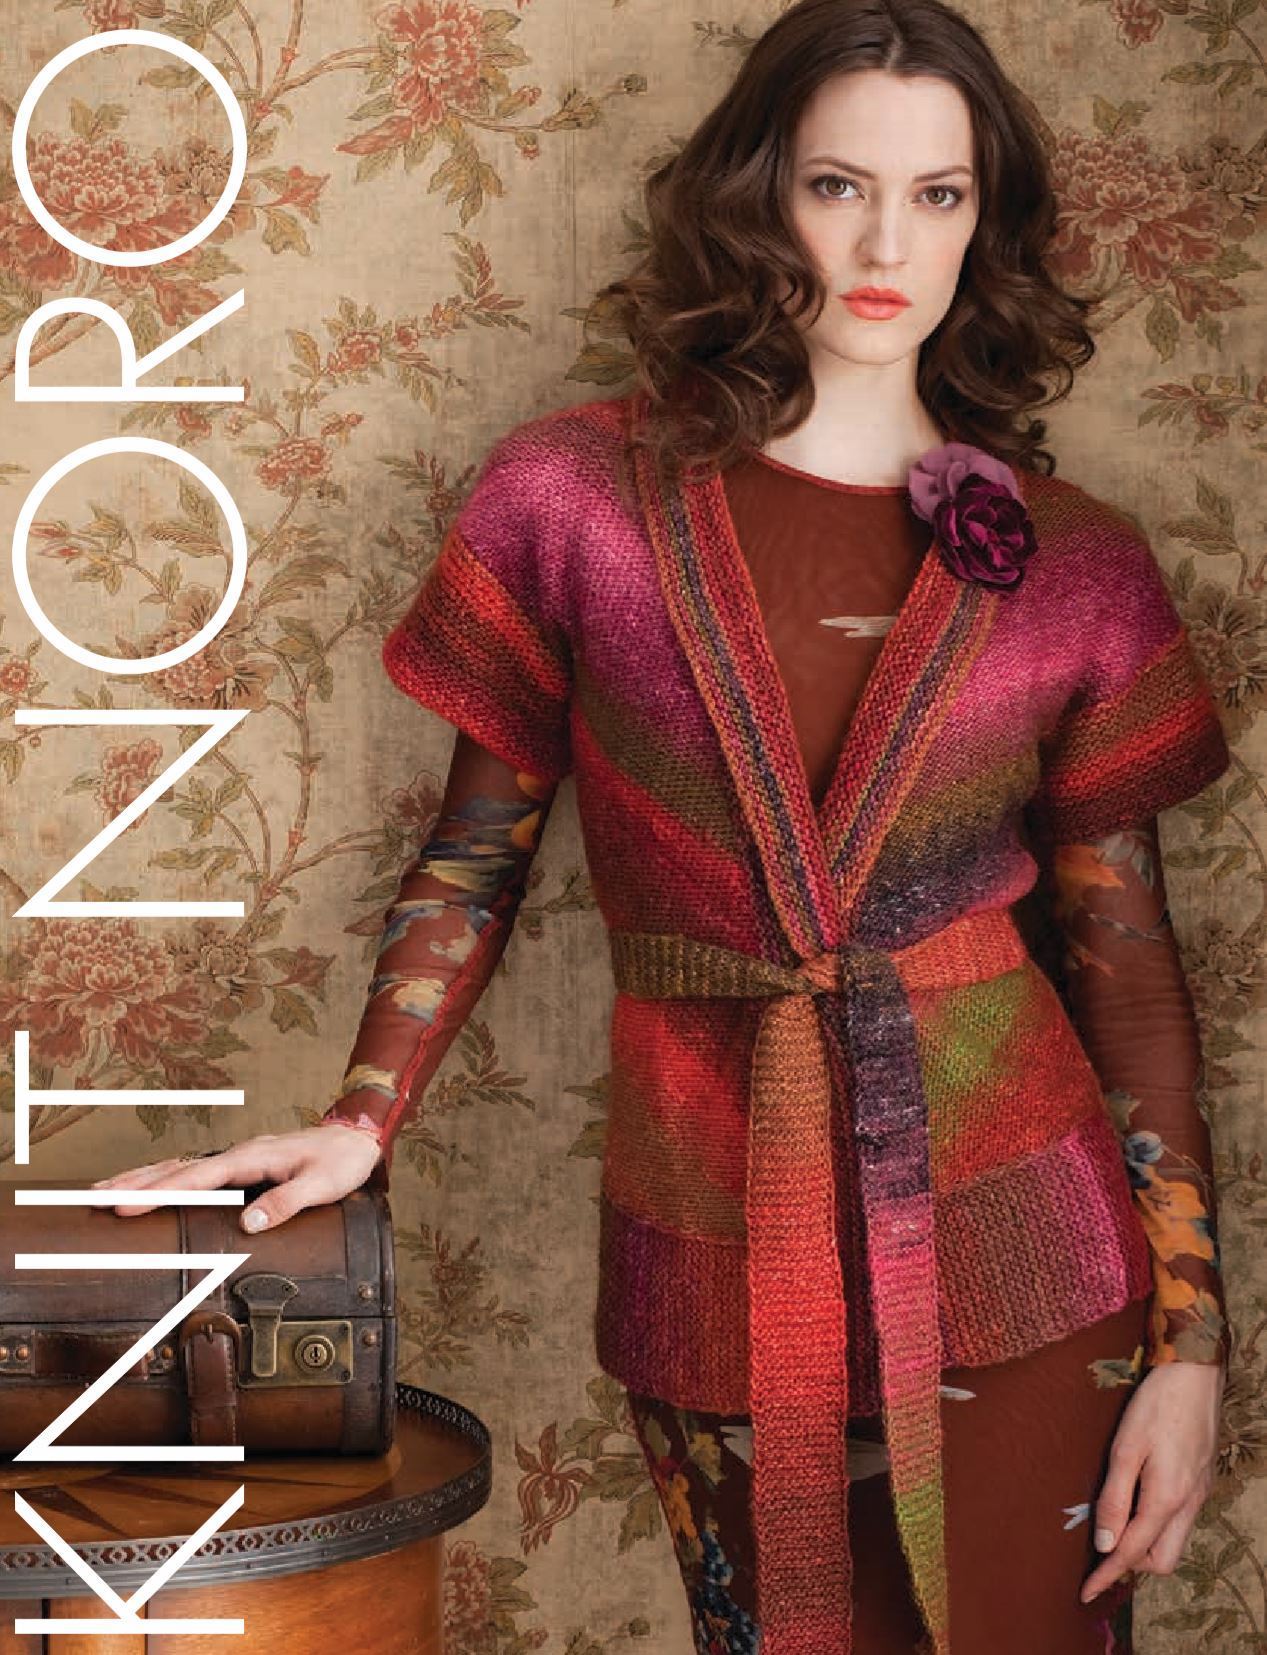 Belted Cardigan Vest Pattern by Noro Noro